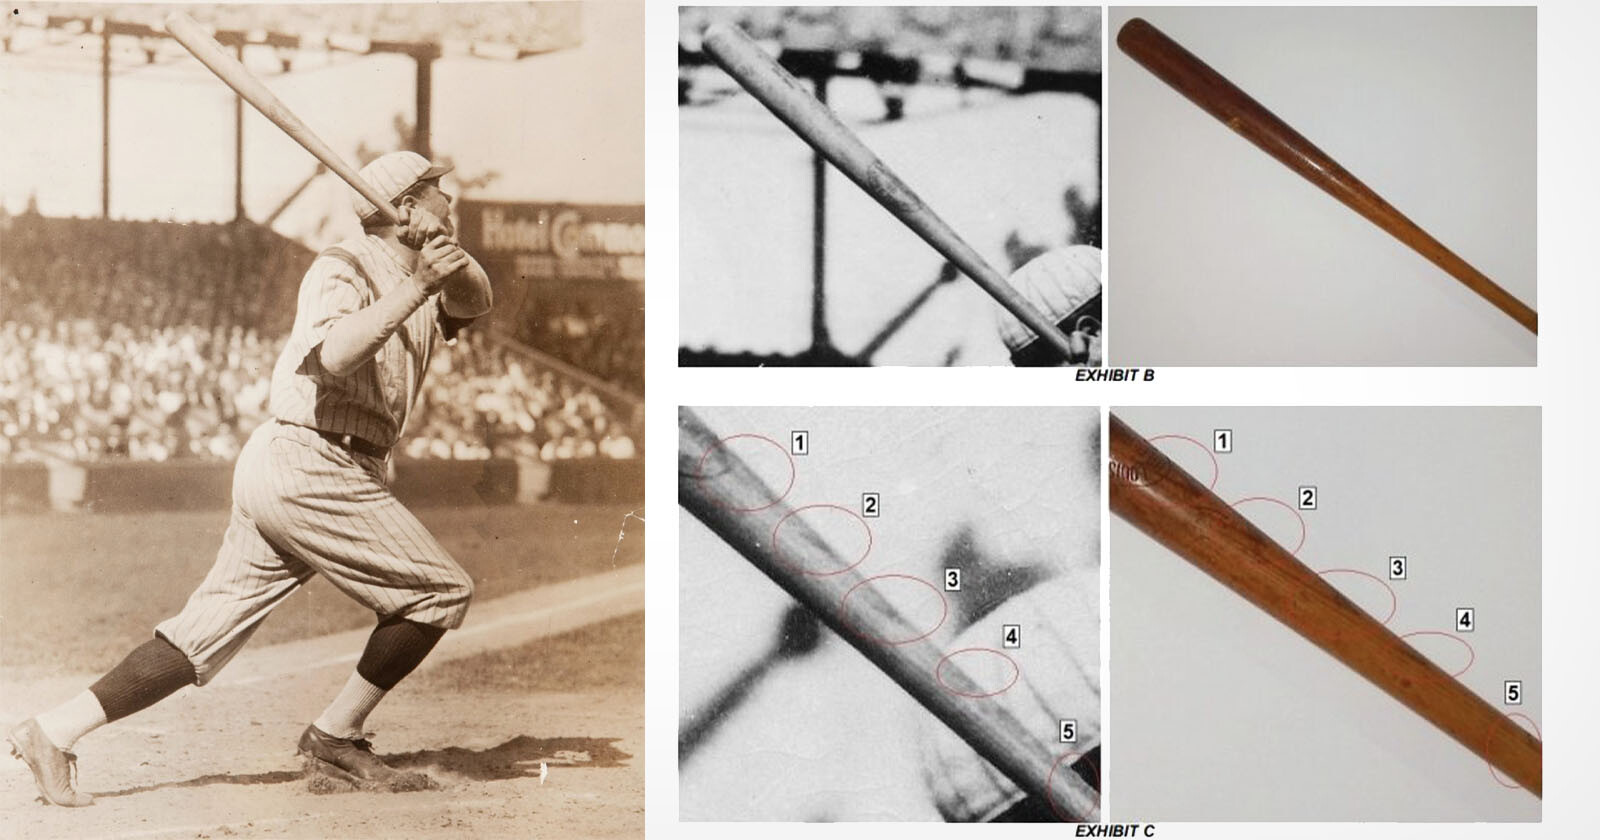 Babe Ruth Baseball Bat Breaks Auction Sale Record Thanks to Photo Evidence